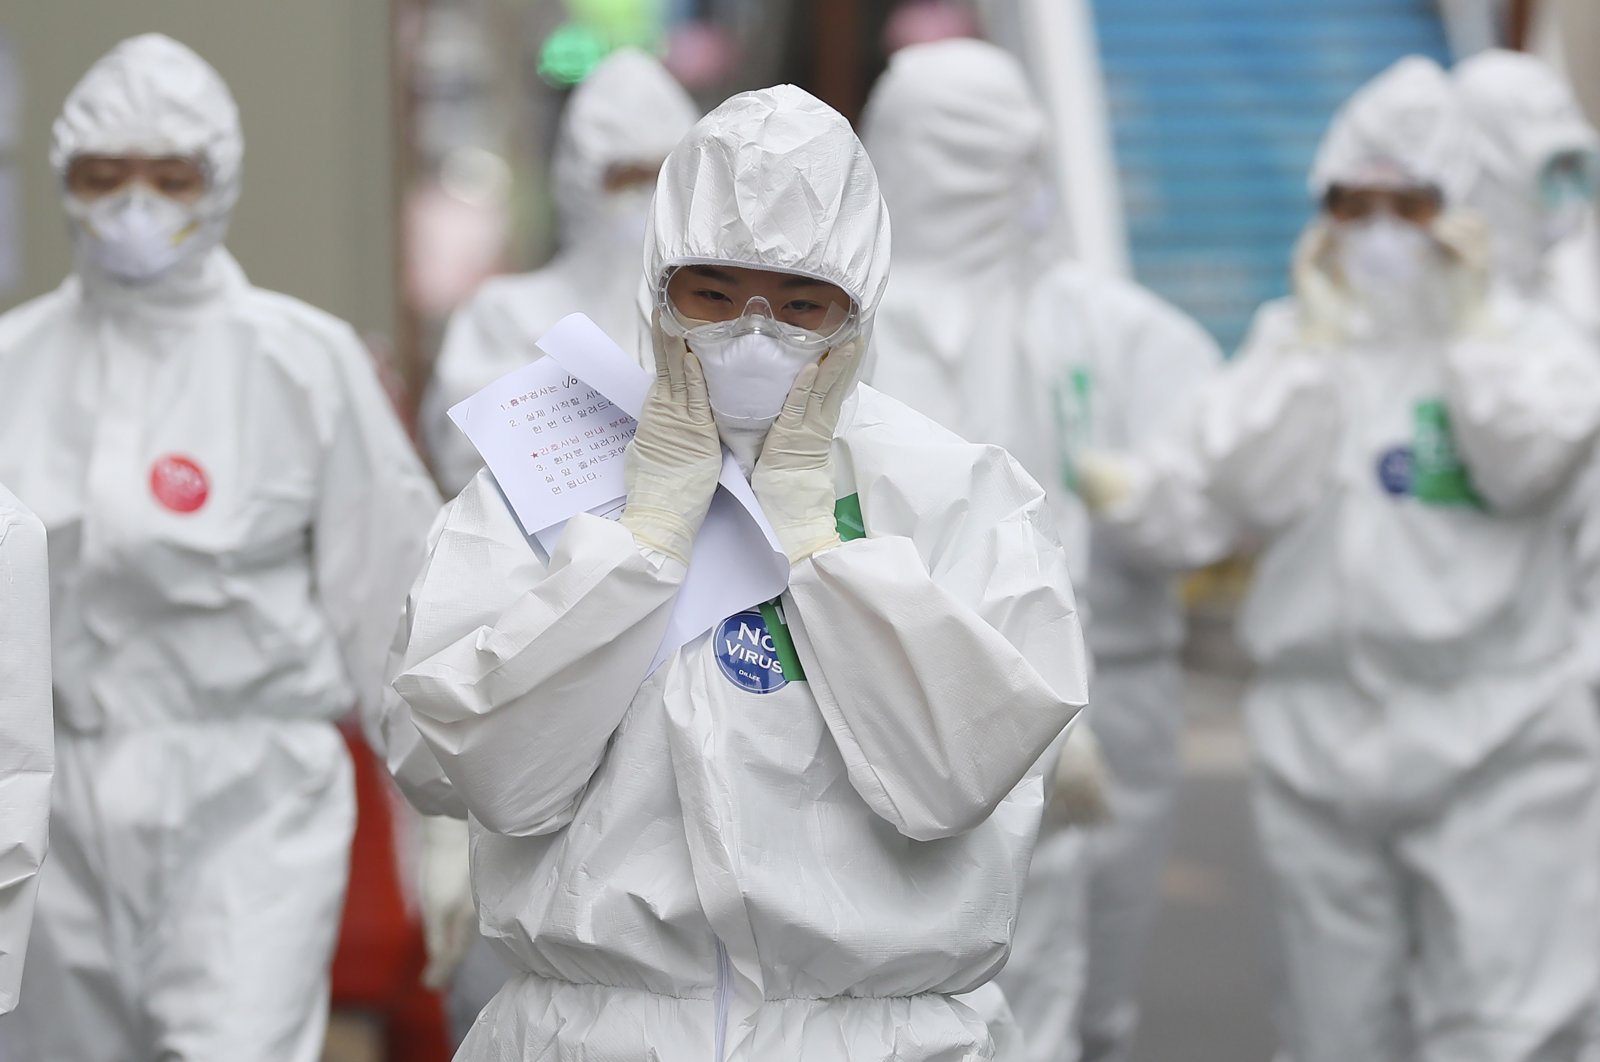 A medical staff member adjusts her face mask as she arrives for a duty shift at Dongsan Medical Center in Daegu, South Korea, Monday, April 13, 2020. (AP Photo)